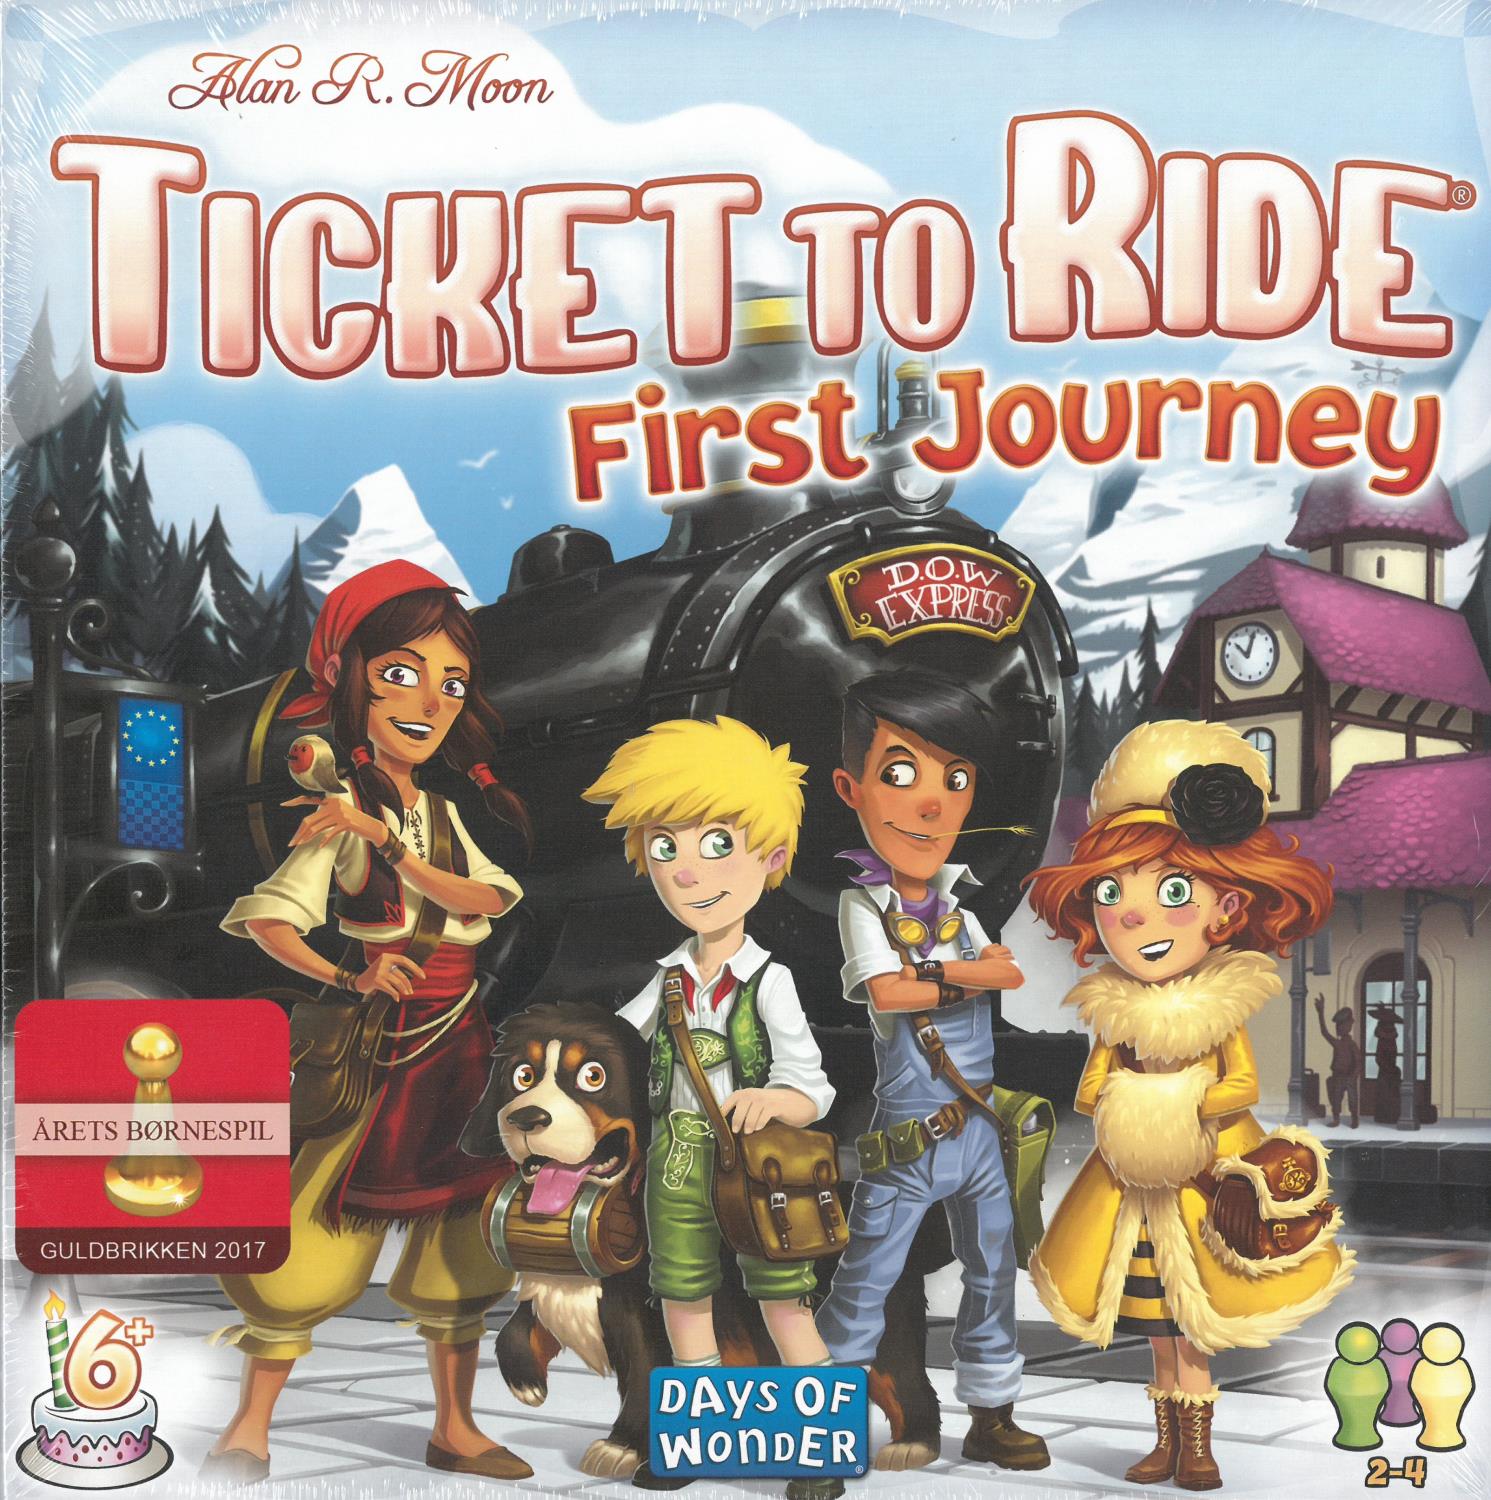 Ticket to ride, first journey